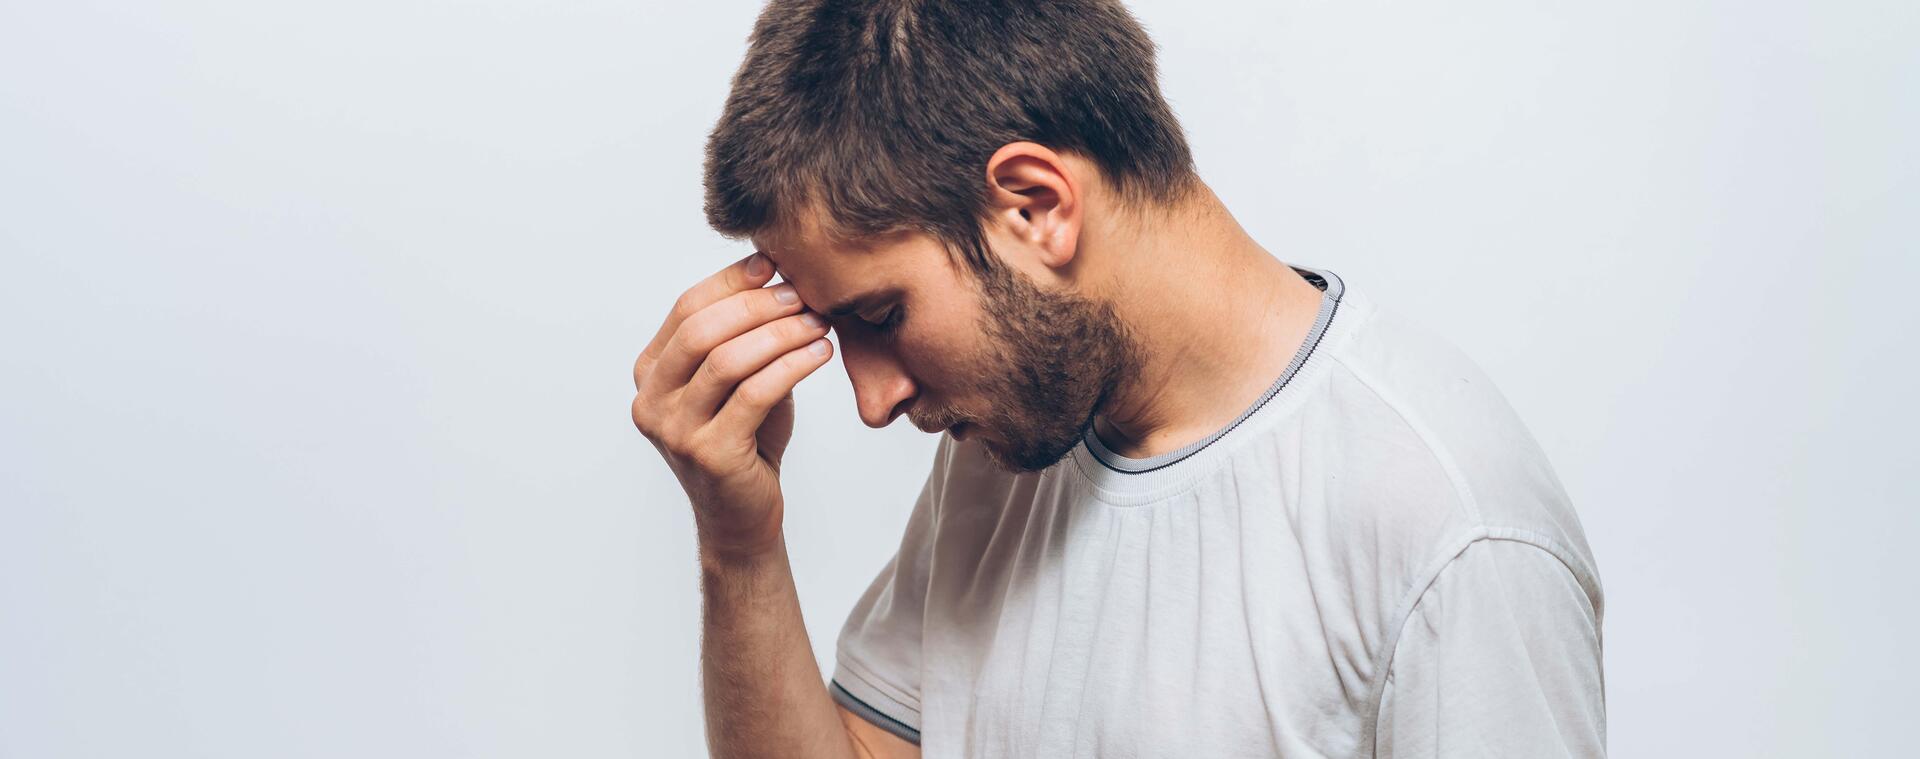 Young man has a headache and holds his hand to his forehead